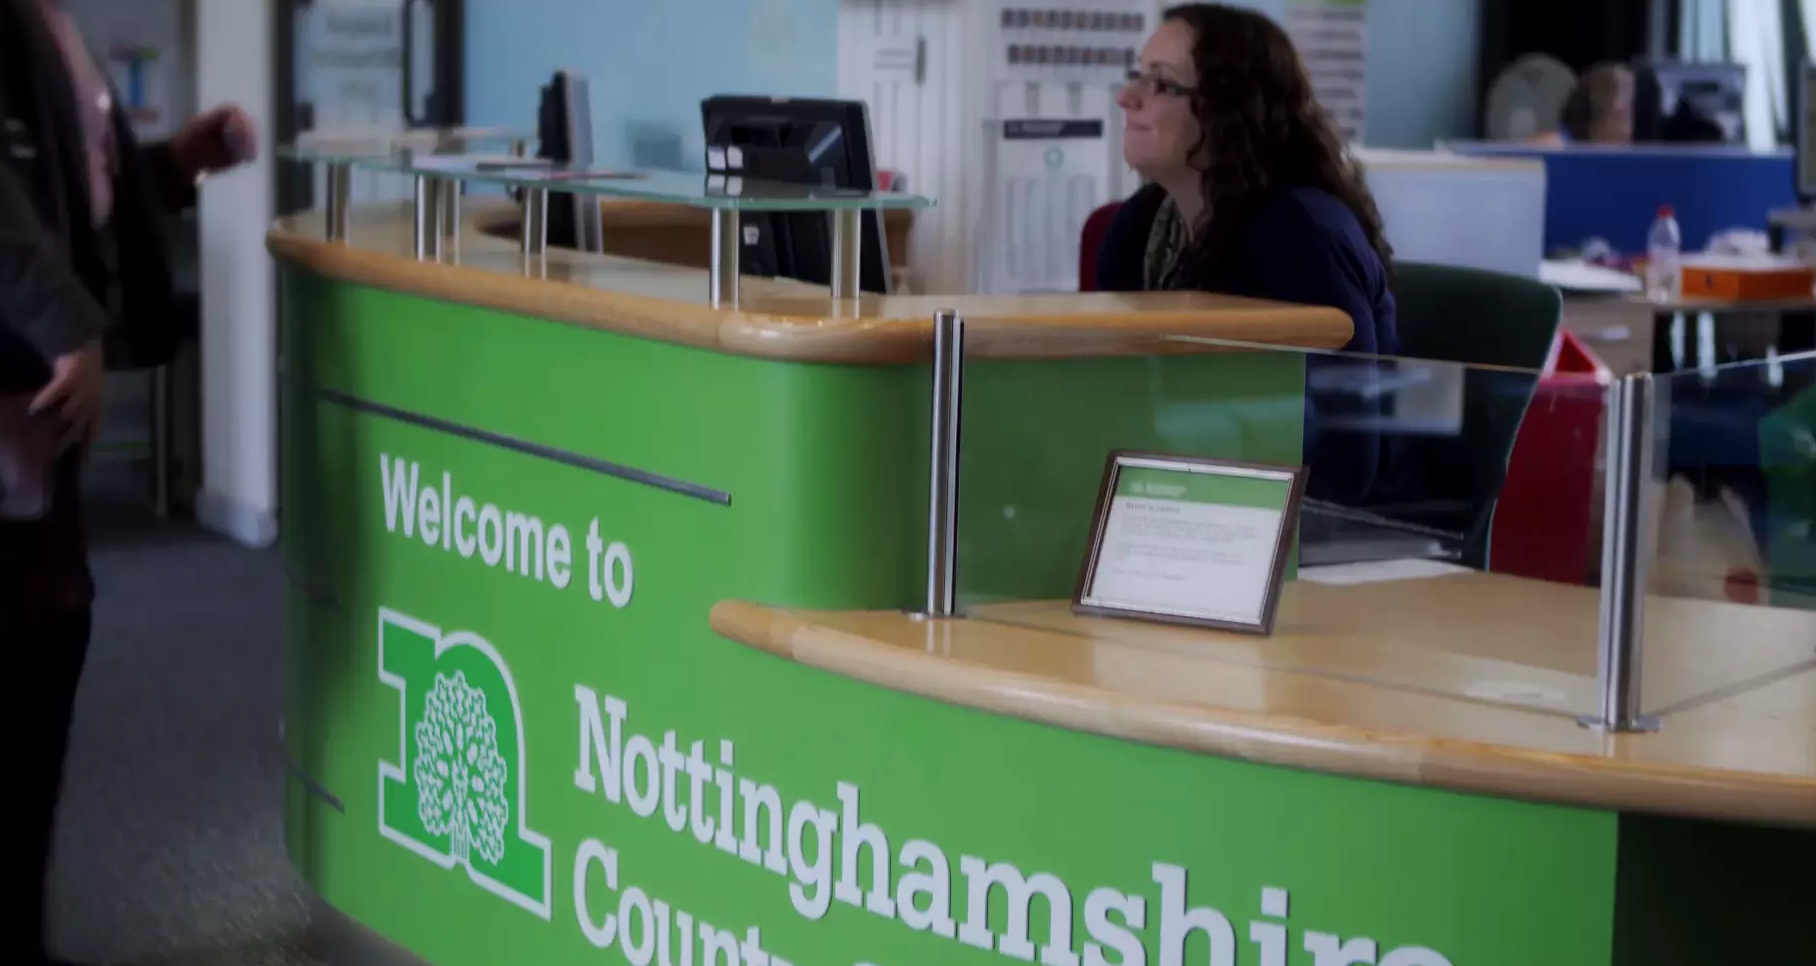 Nottinghamshire County Council Case Study – Surface & Office 365